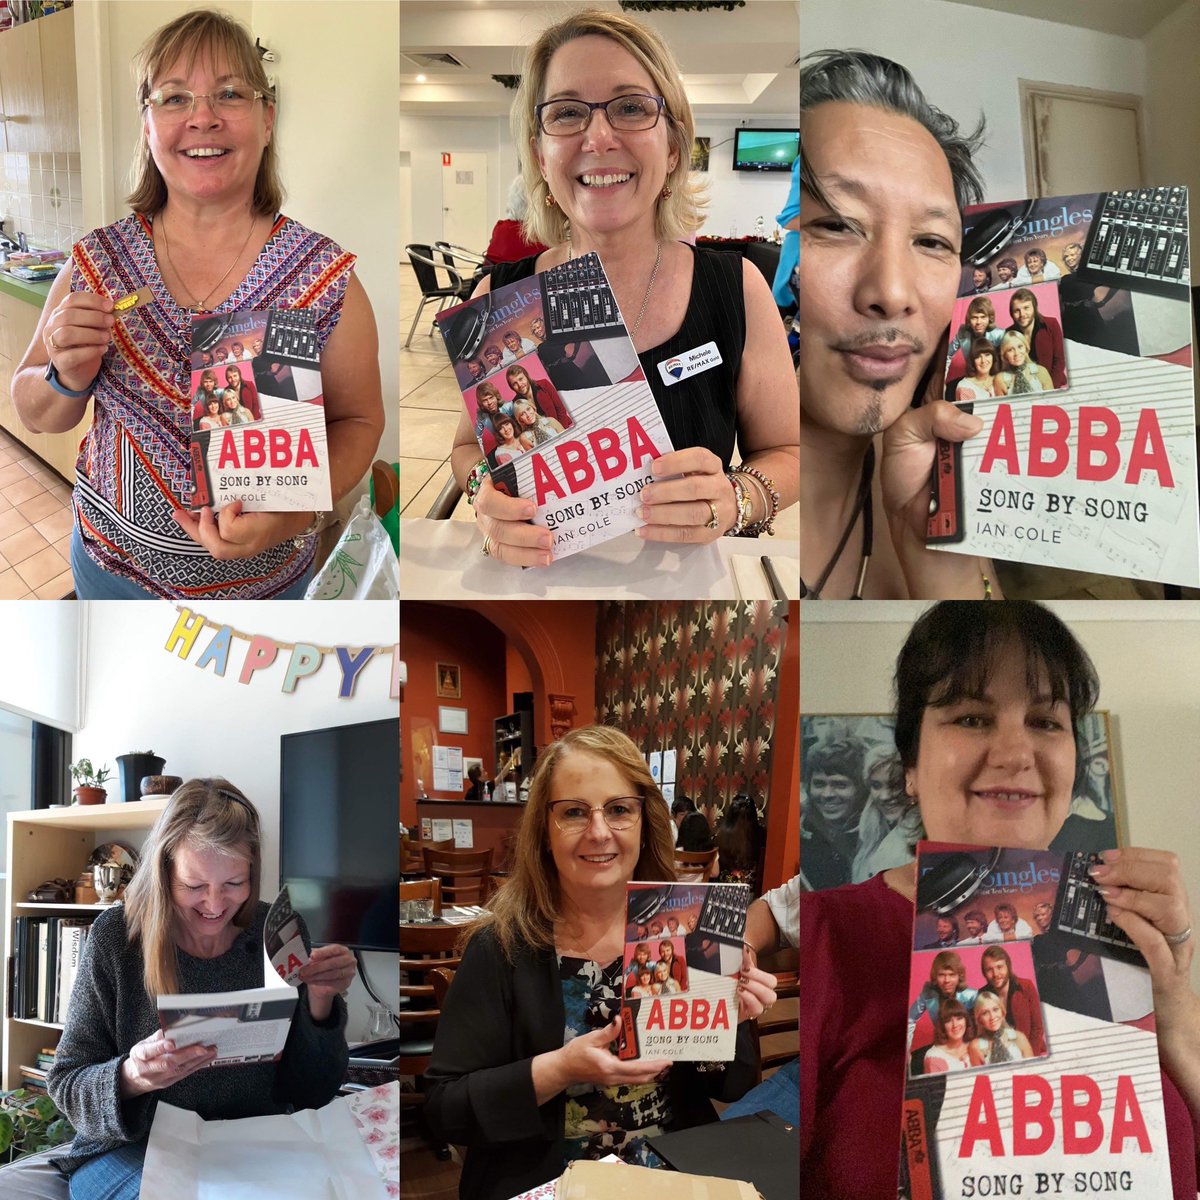 Happy readers of ABBA: Song By Song 😊📕

Available now at bookshops worldwide. More information @ abbasongbysong.wordpress.com

#abbasongbysong #songbysong #abba